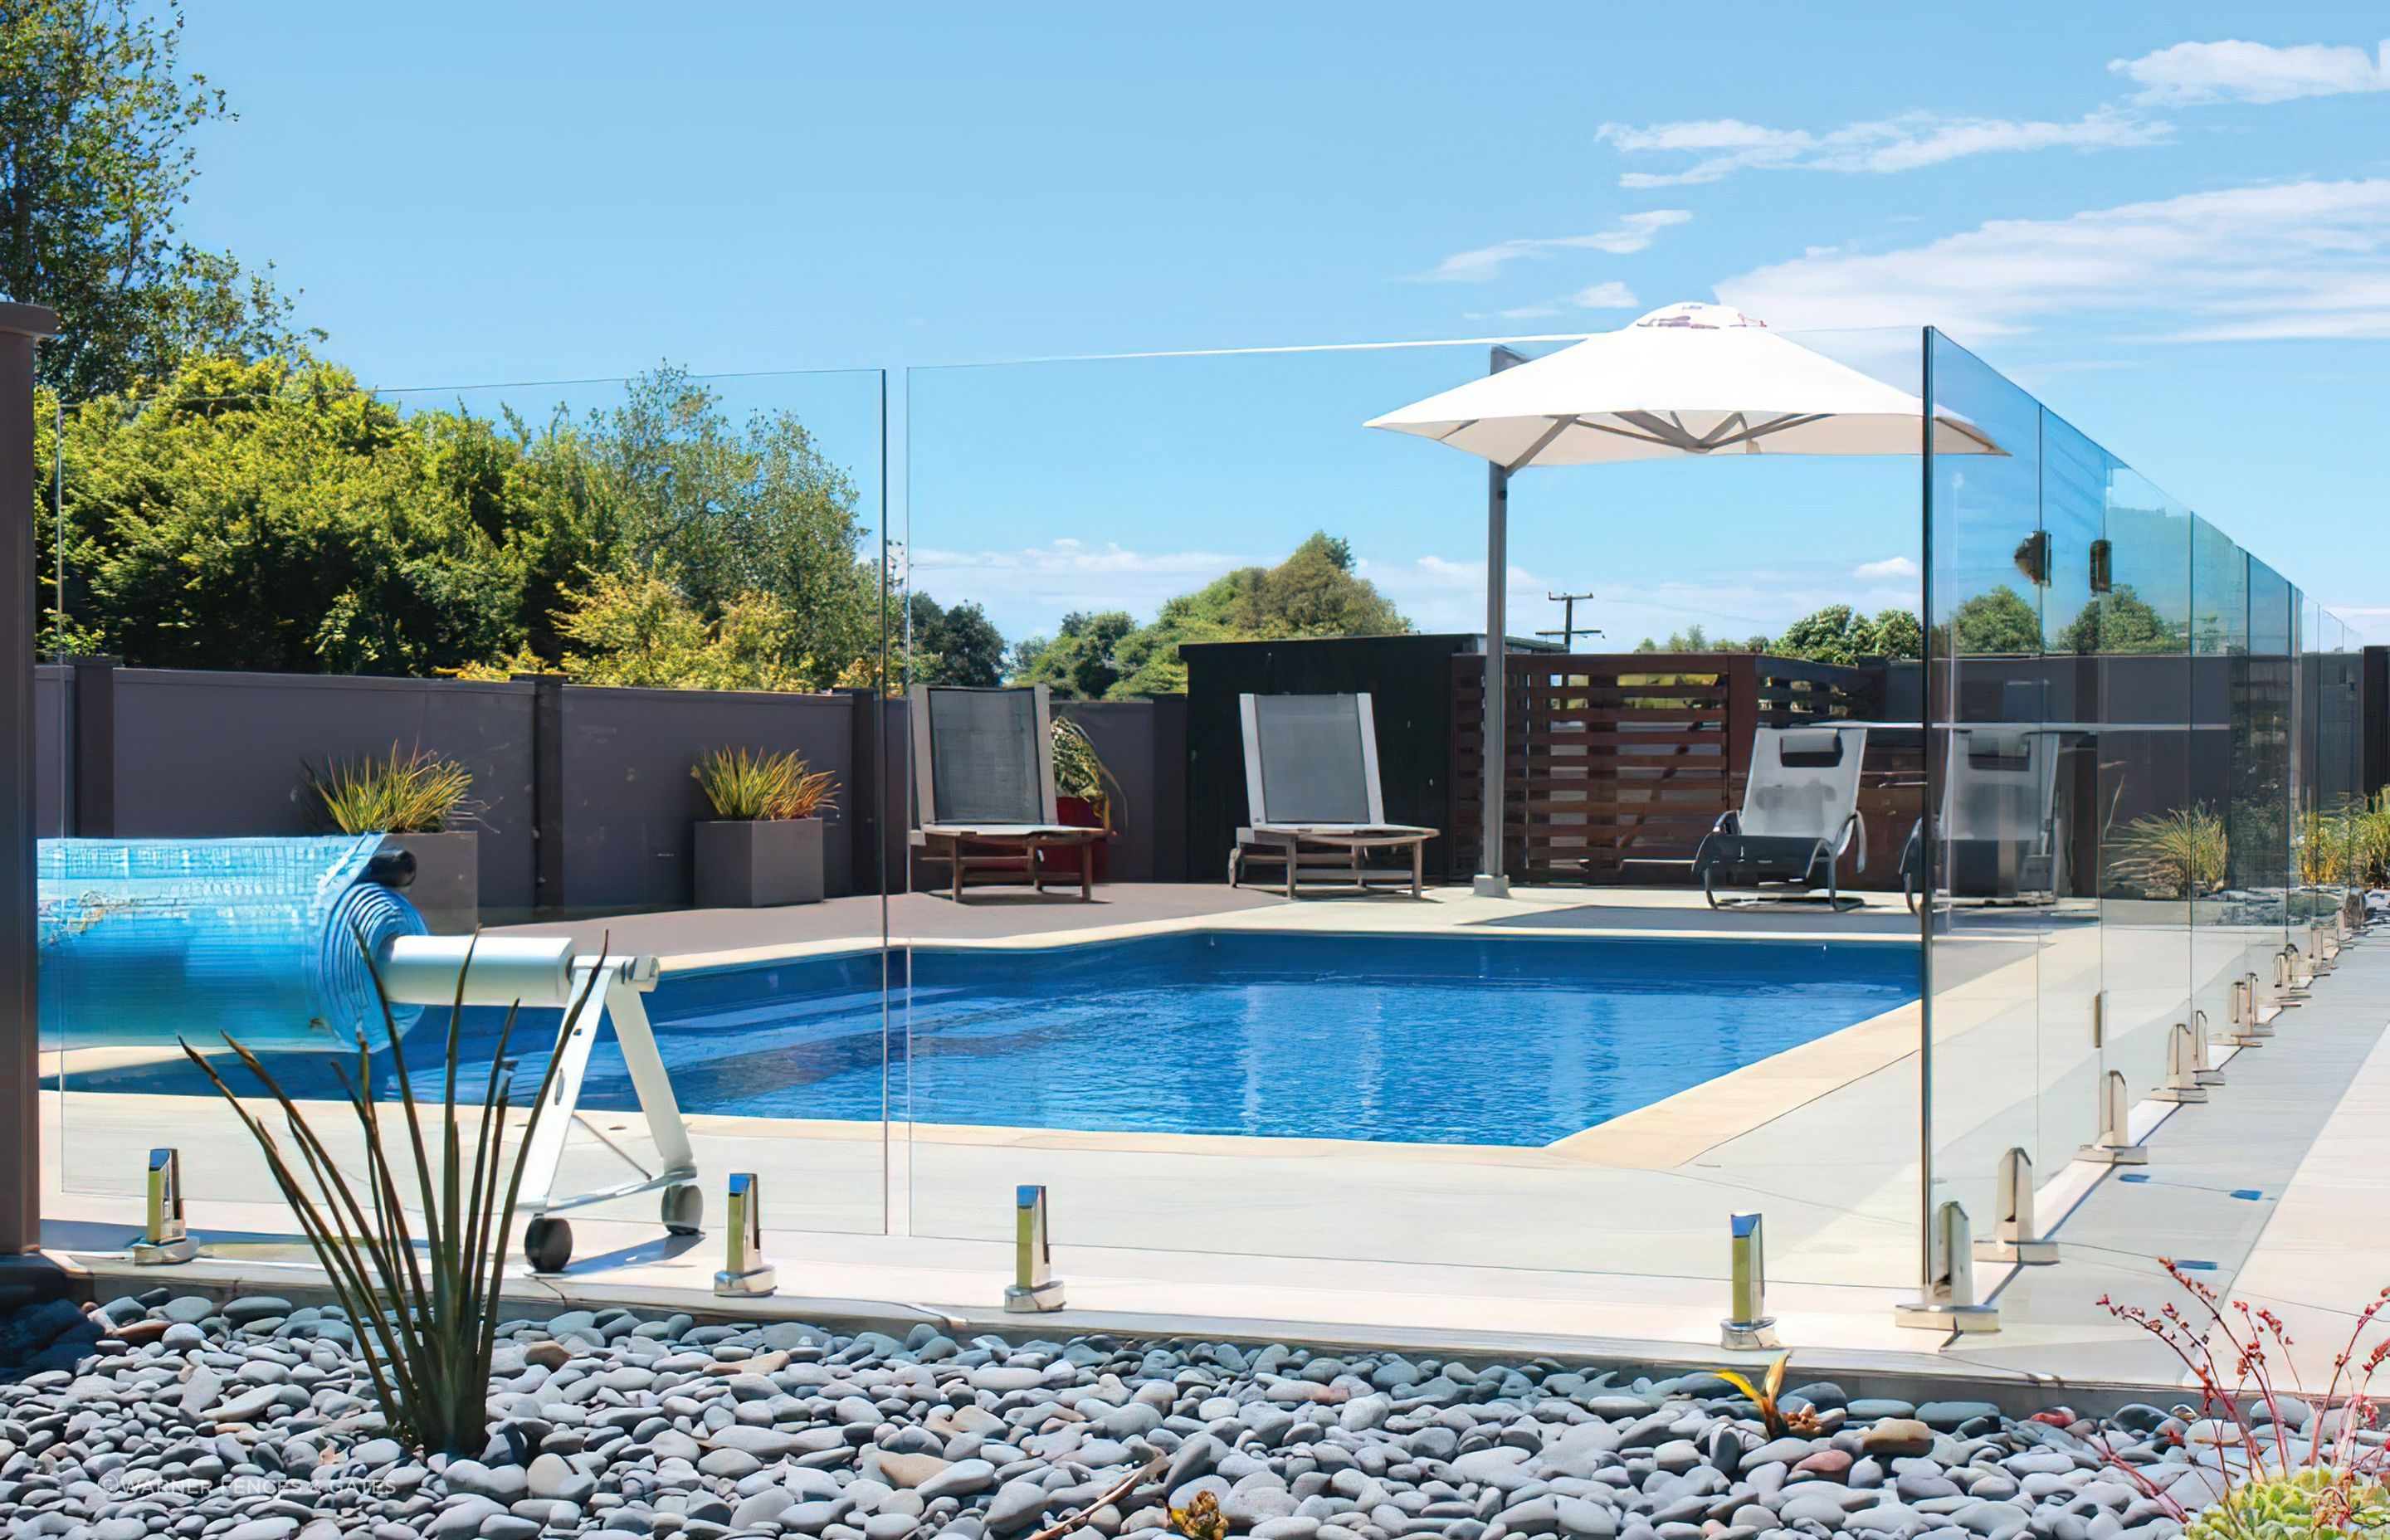 A great example of a frameless glass pool fence with spigots fixed to the surface.